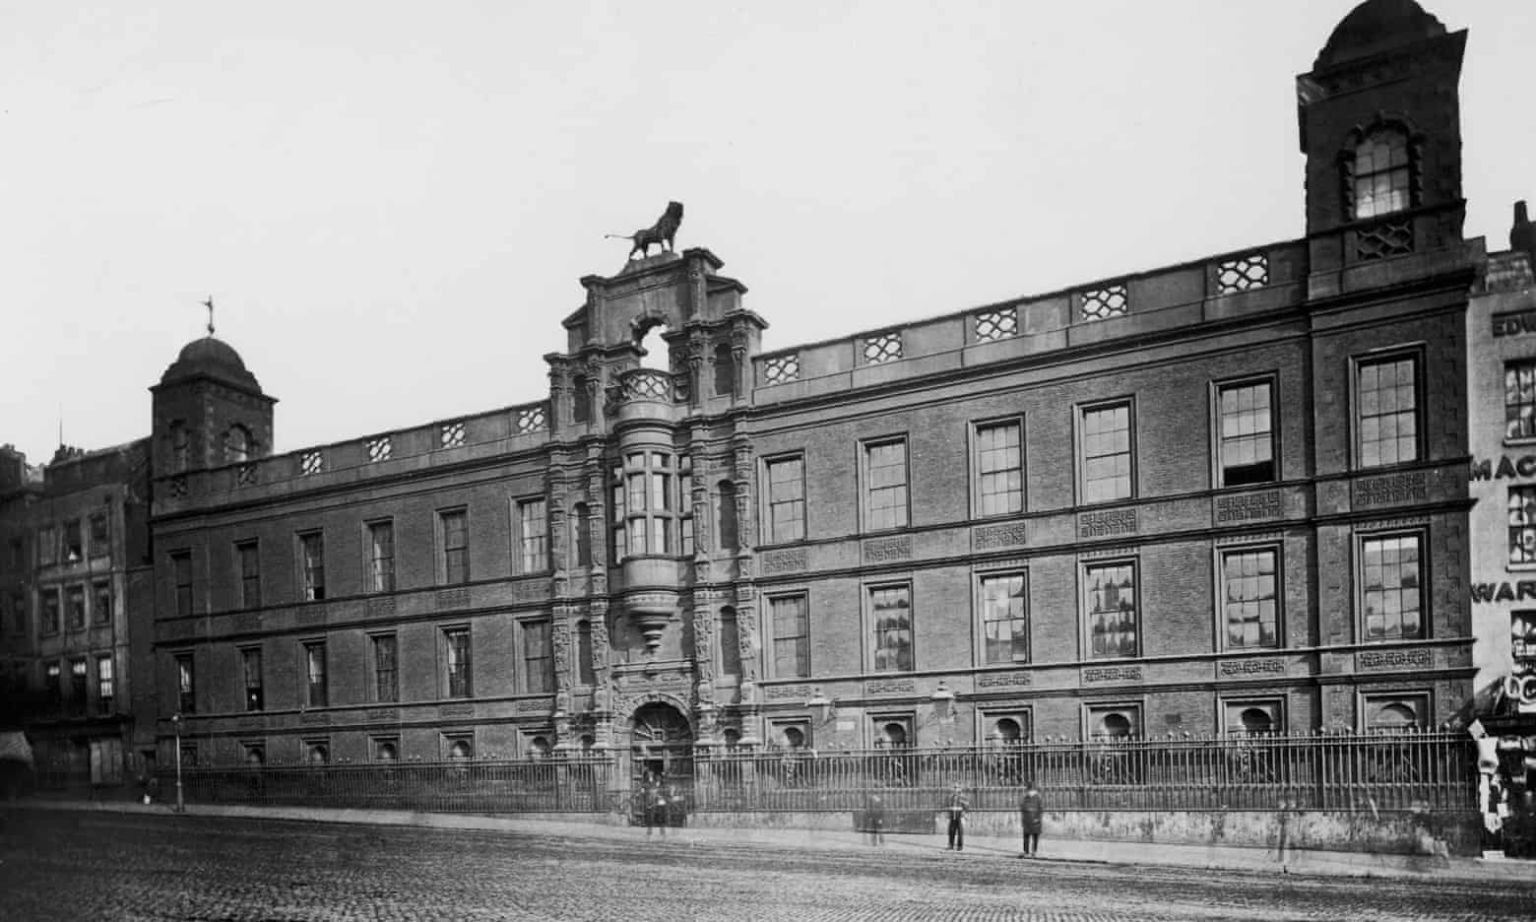 Northumberland House – Survived